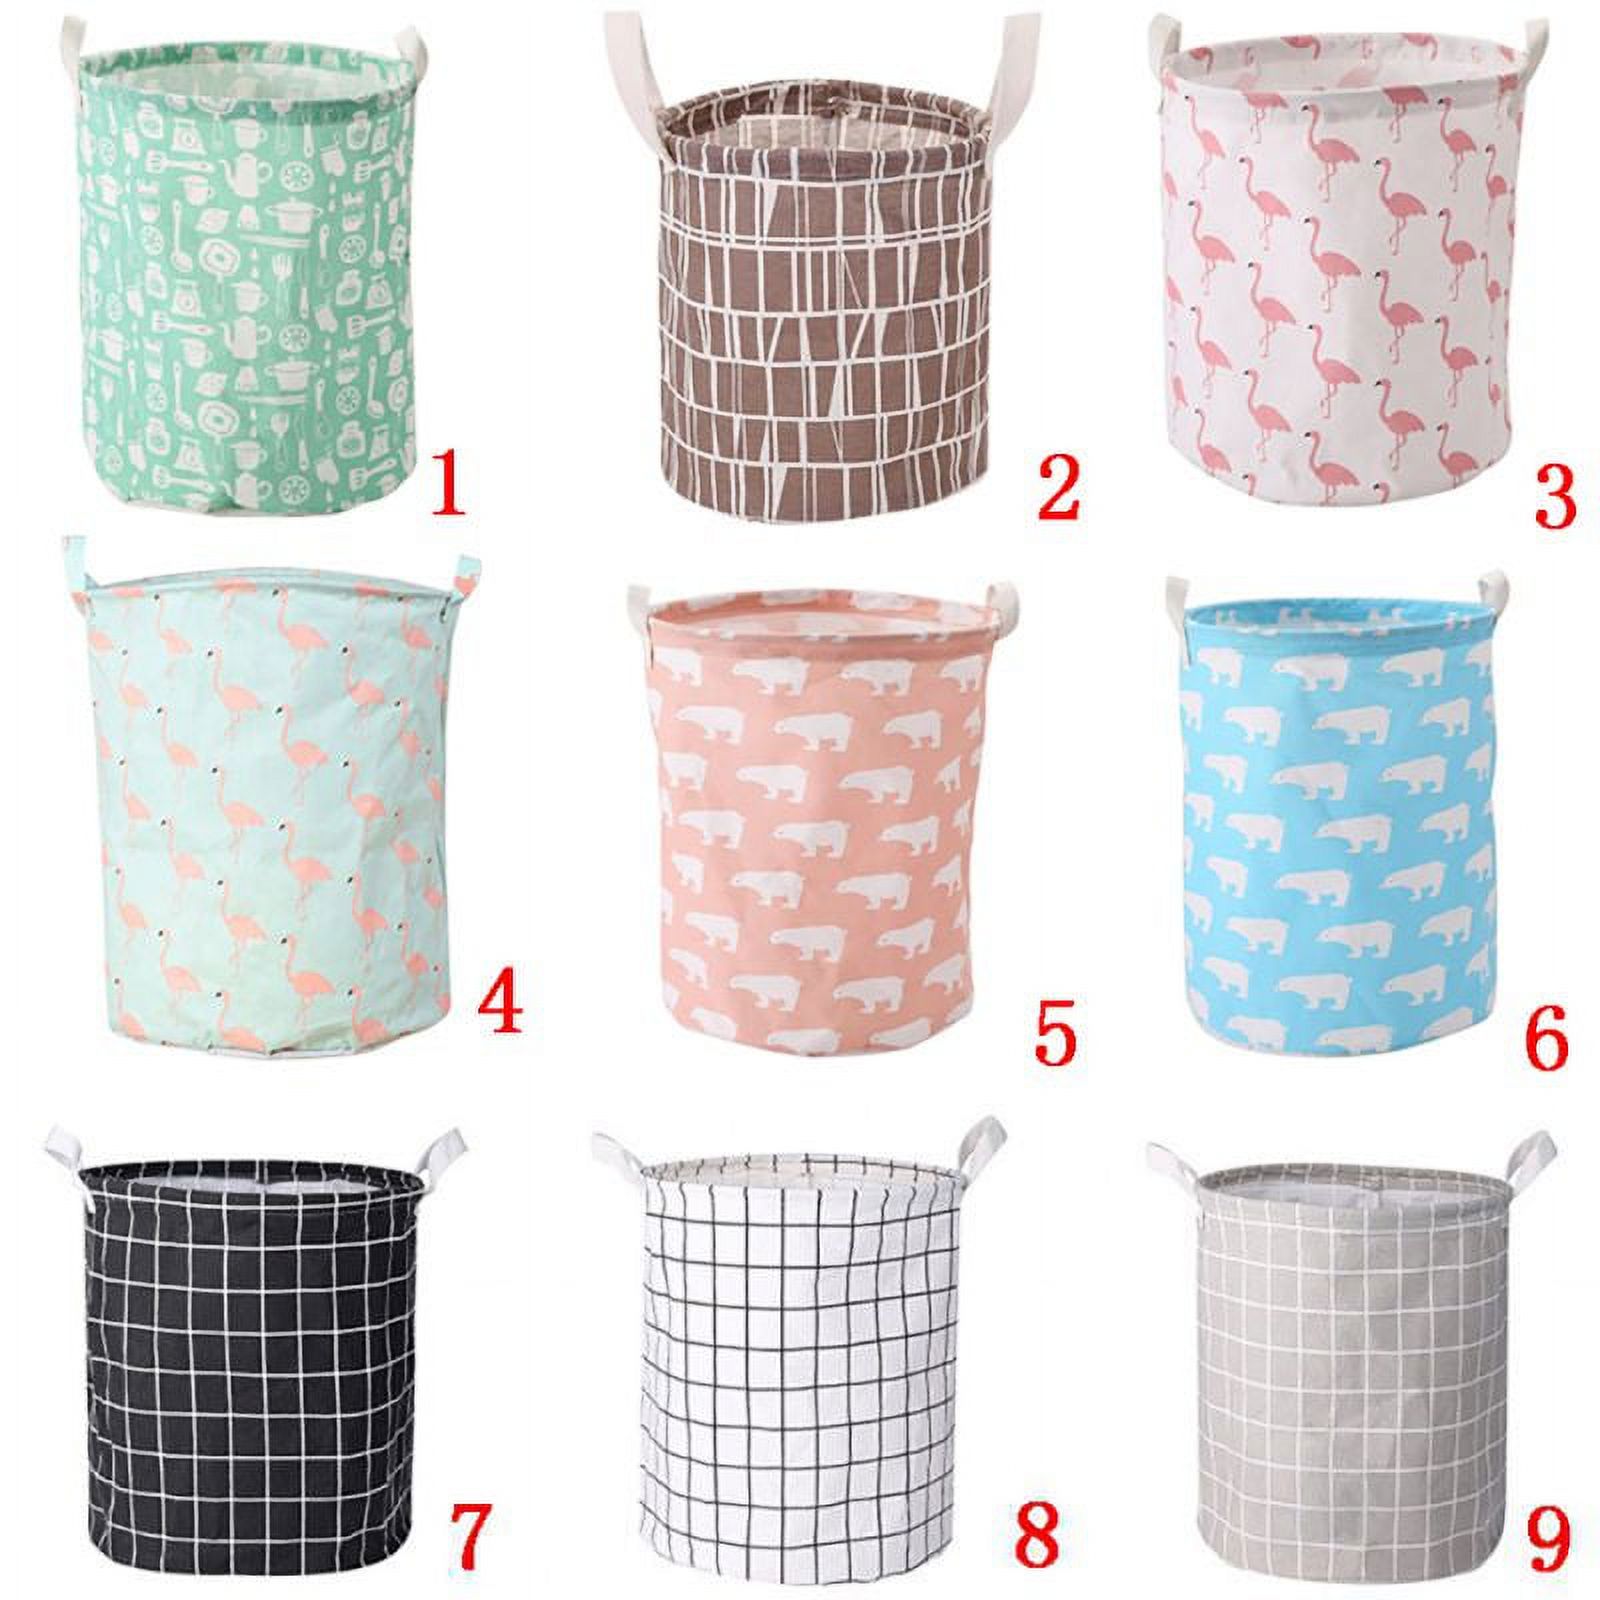 Storage Basket Bins, Foldable Cloth Cube Organizer with Carry Handles for Linens, Towels, Toys, Drawers, Home Closet, Shelf, Nursery, Cabinet - image 1 of 7